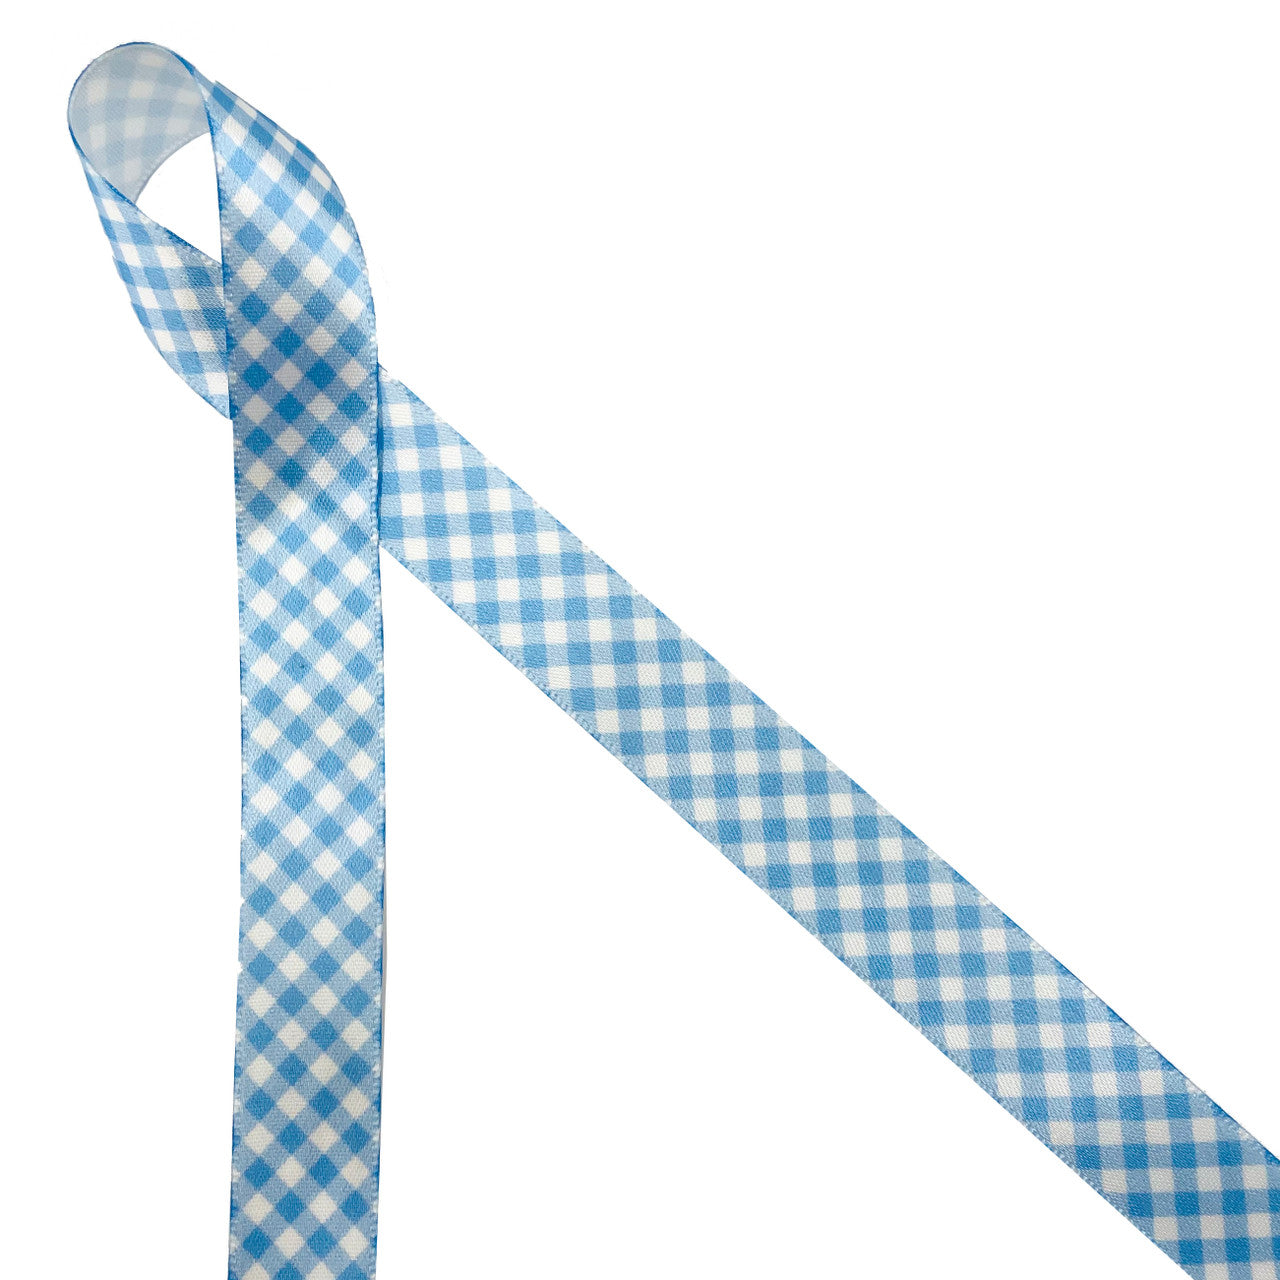 Light Blue gingham printed on 5/8" white single face satin ribbon is such a versatile ribbon for adorning gifts and favors. This is the go to ribbon for baby showers, christenings, birthdays and Summer parties.